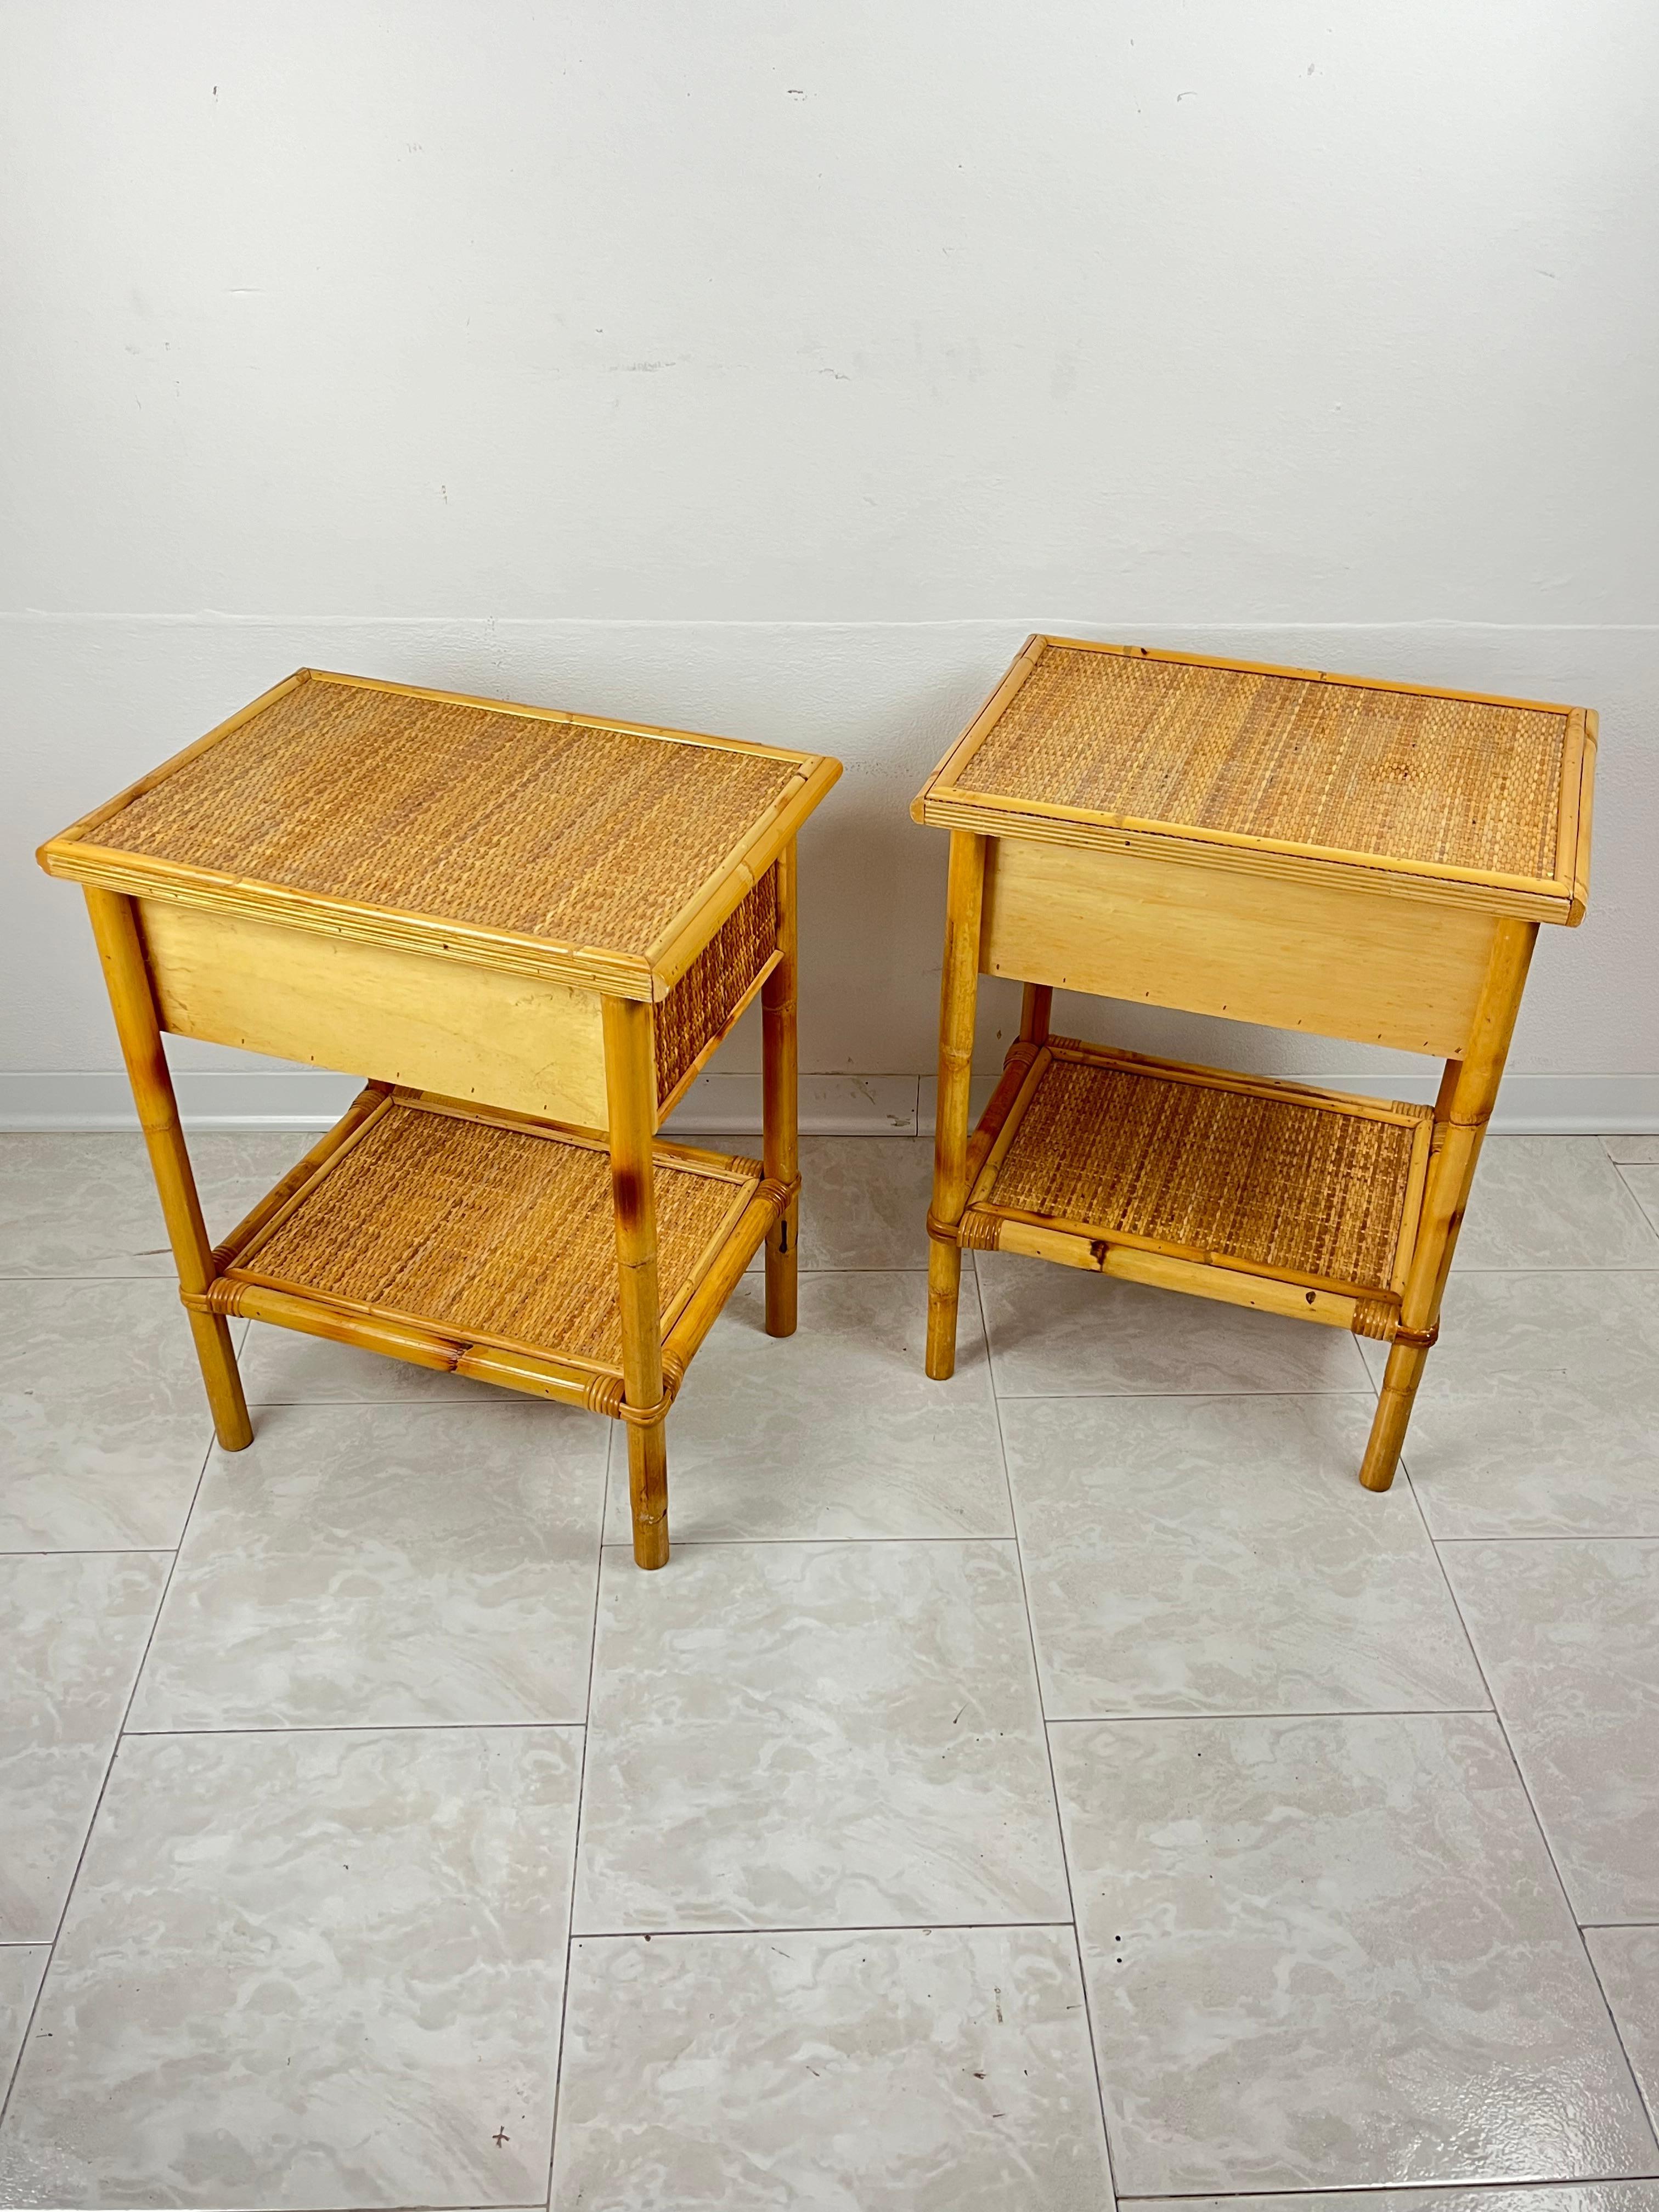 Set of 2 Mid-Century French Riviera Wicker And Rattan Bedside Tables 1960s In Good Condition For Sale In Palermo, IT